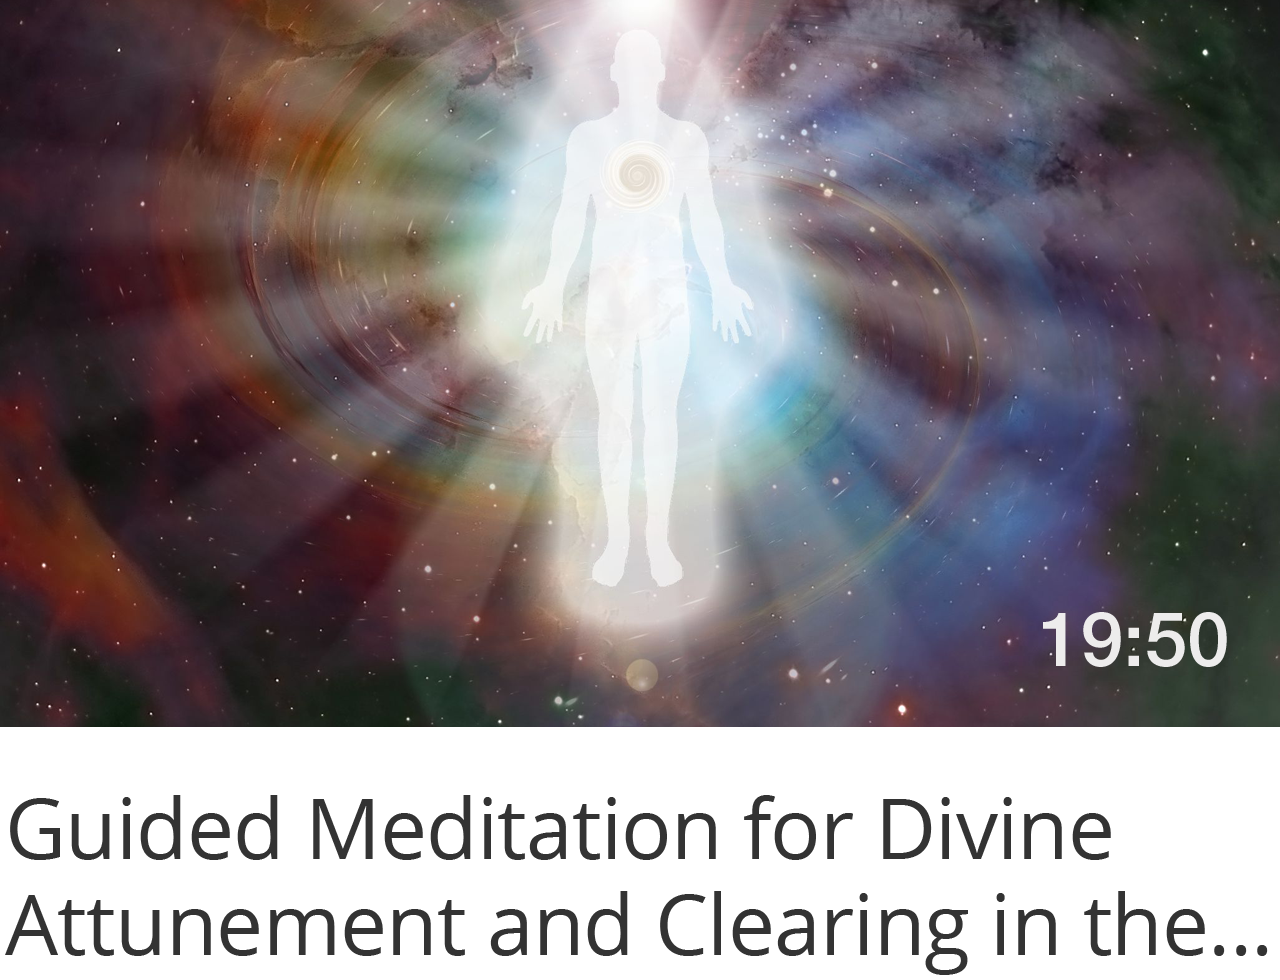 Guided Meditation for Spiritual Attunement and Clearing in the Light